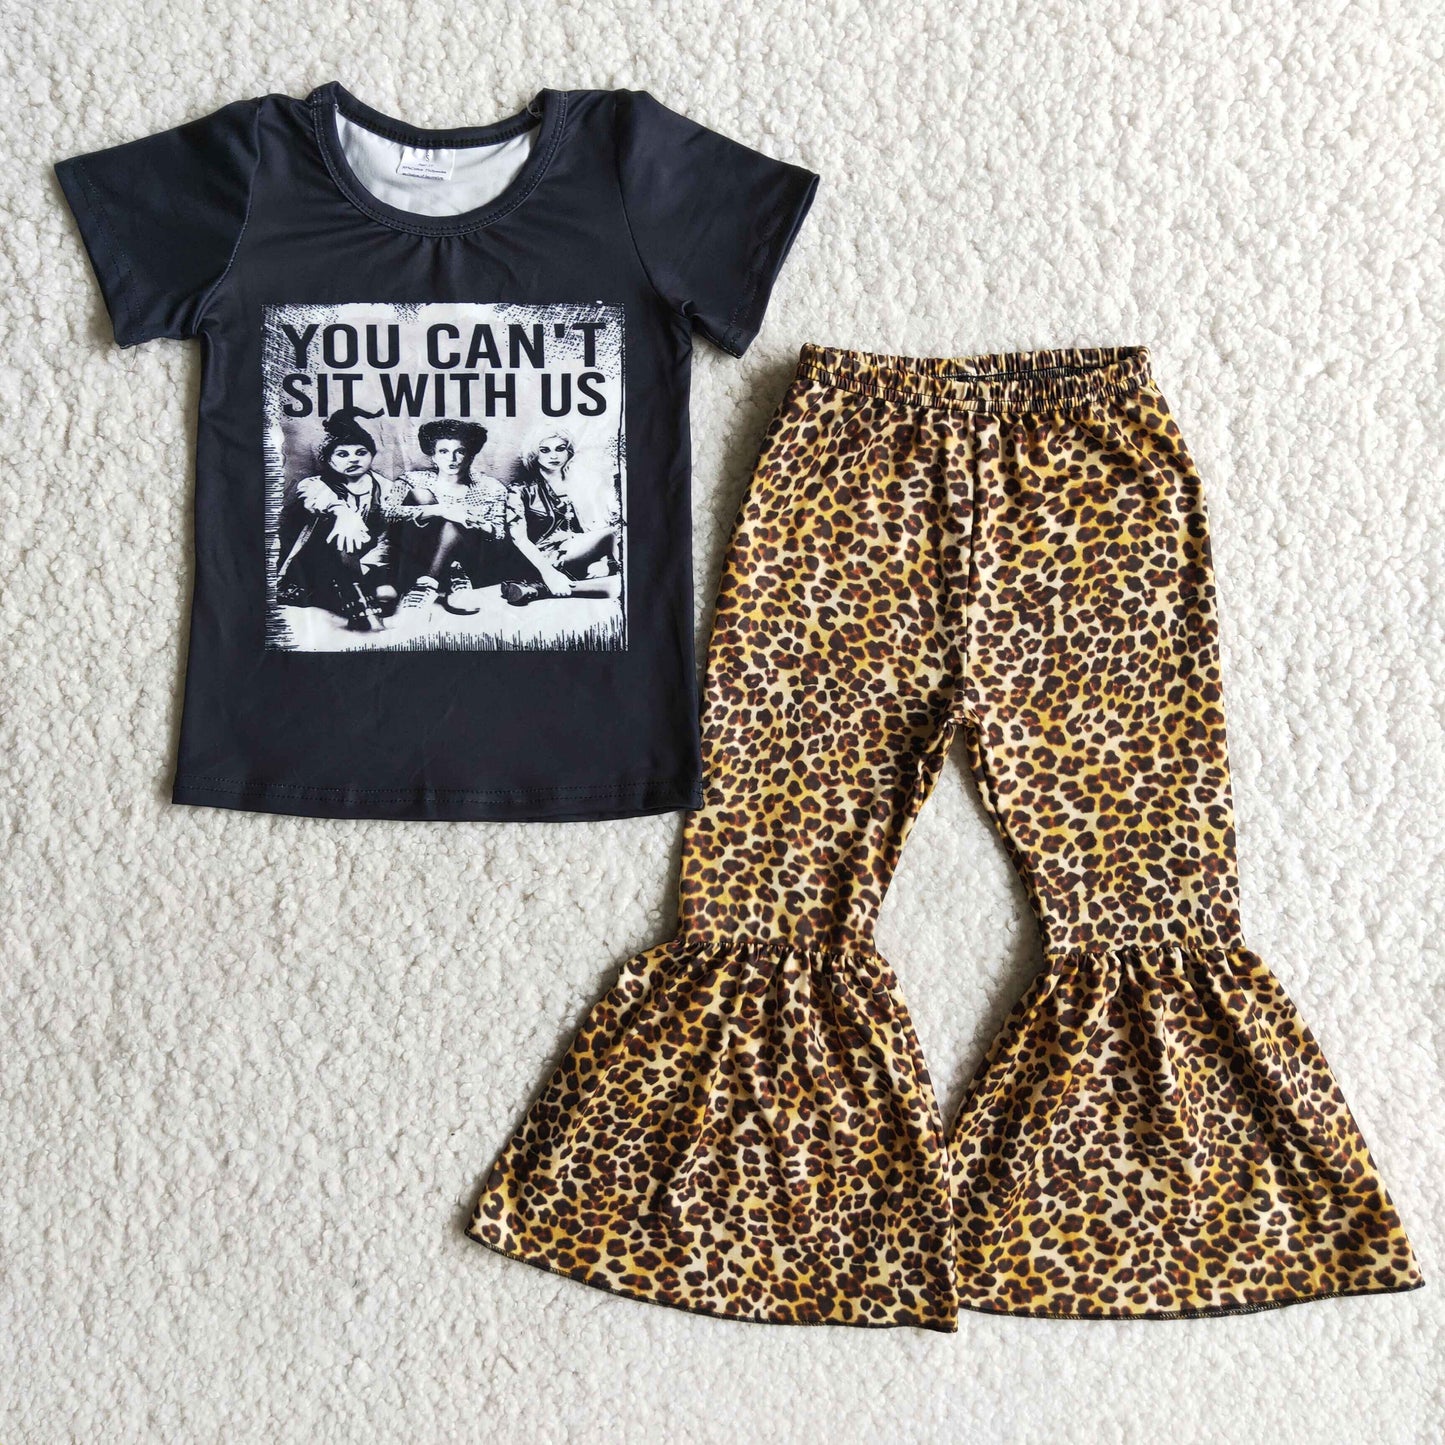 You can't sit with us witches leopard girls Halloween outfit